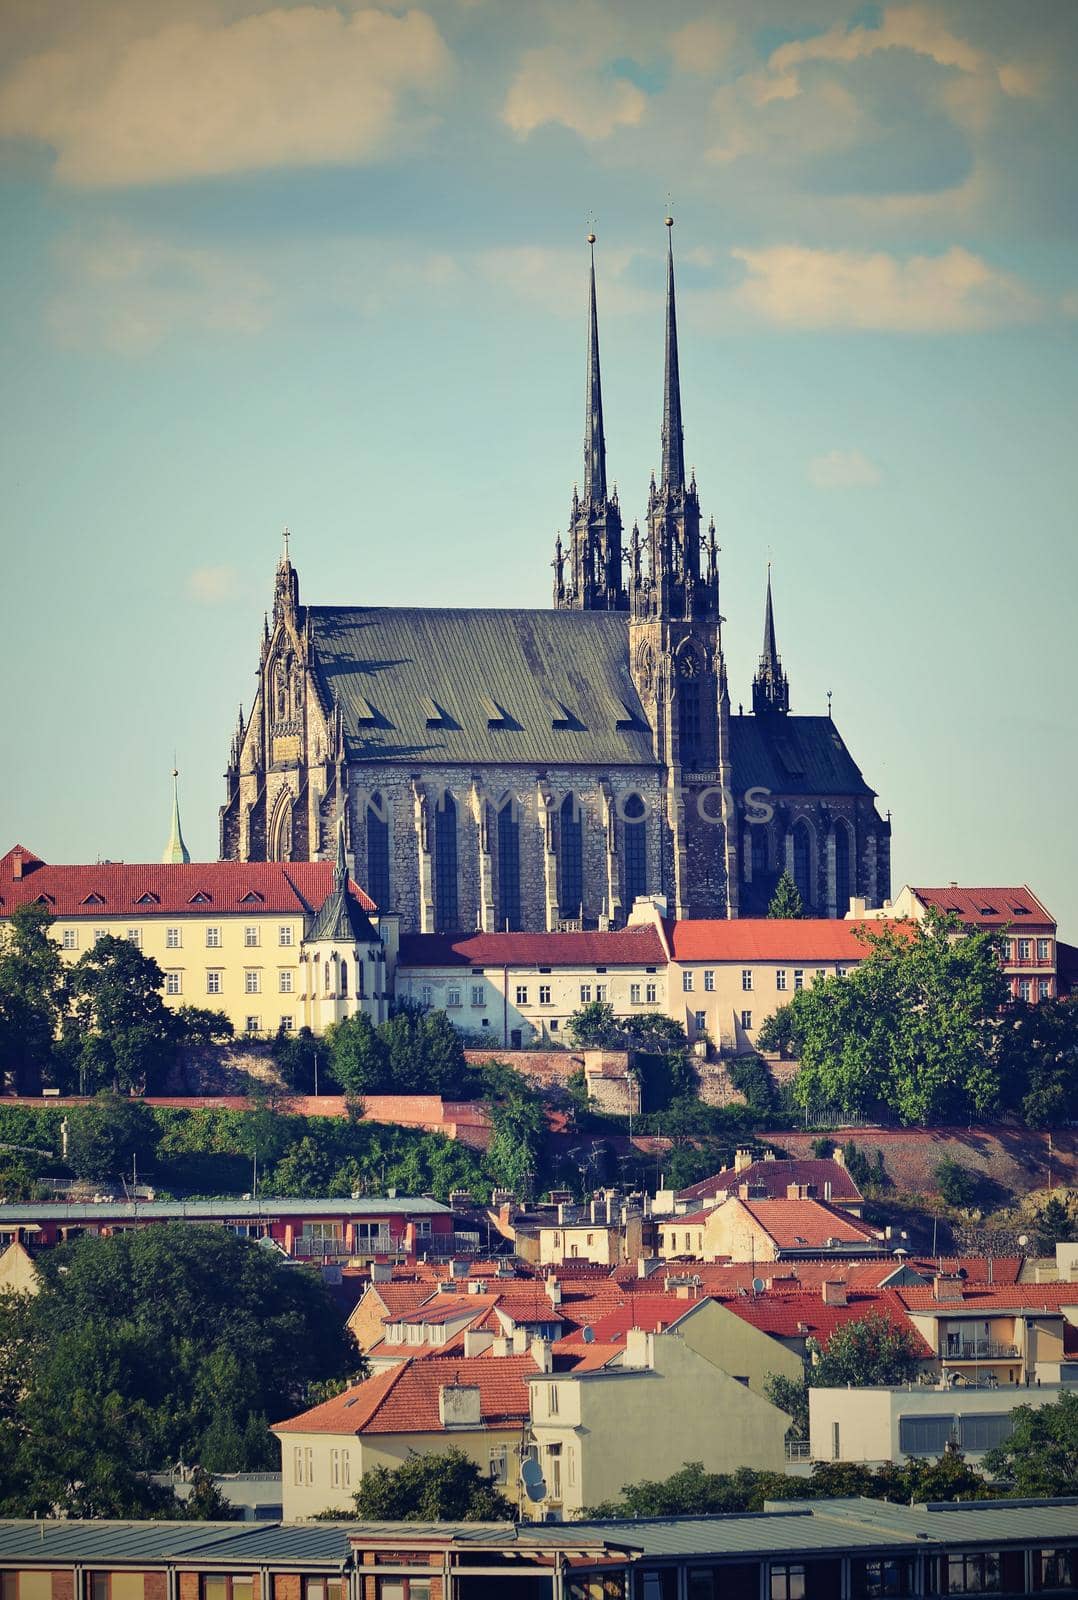 Petrov - St. Peters and Paul church in Brno. Central Europe Czech Republic. South-Moravian region. by Montypeter